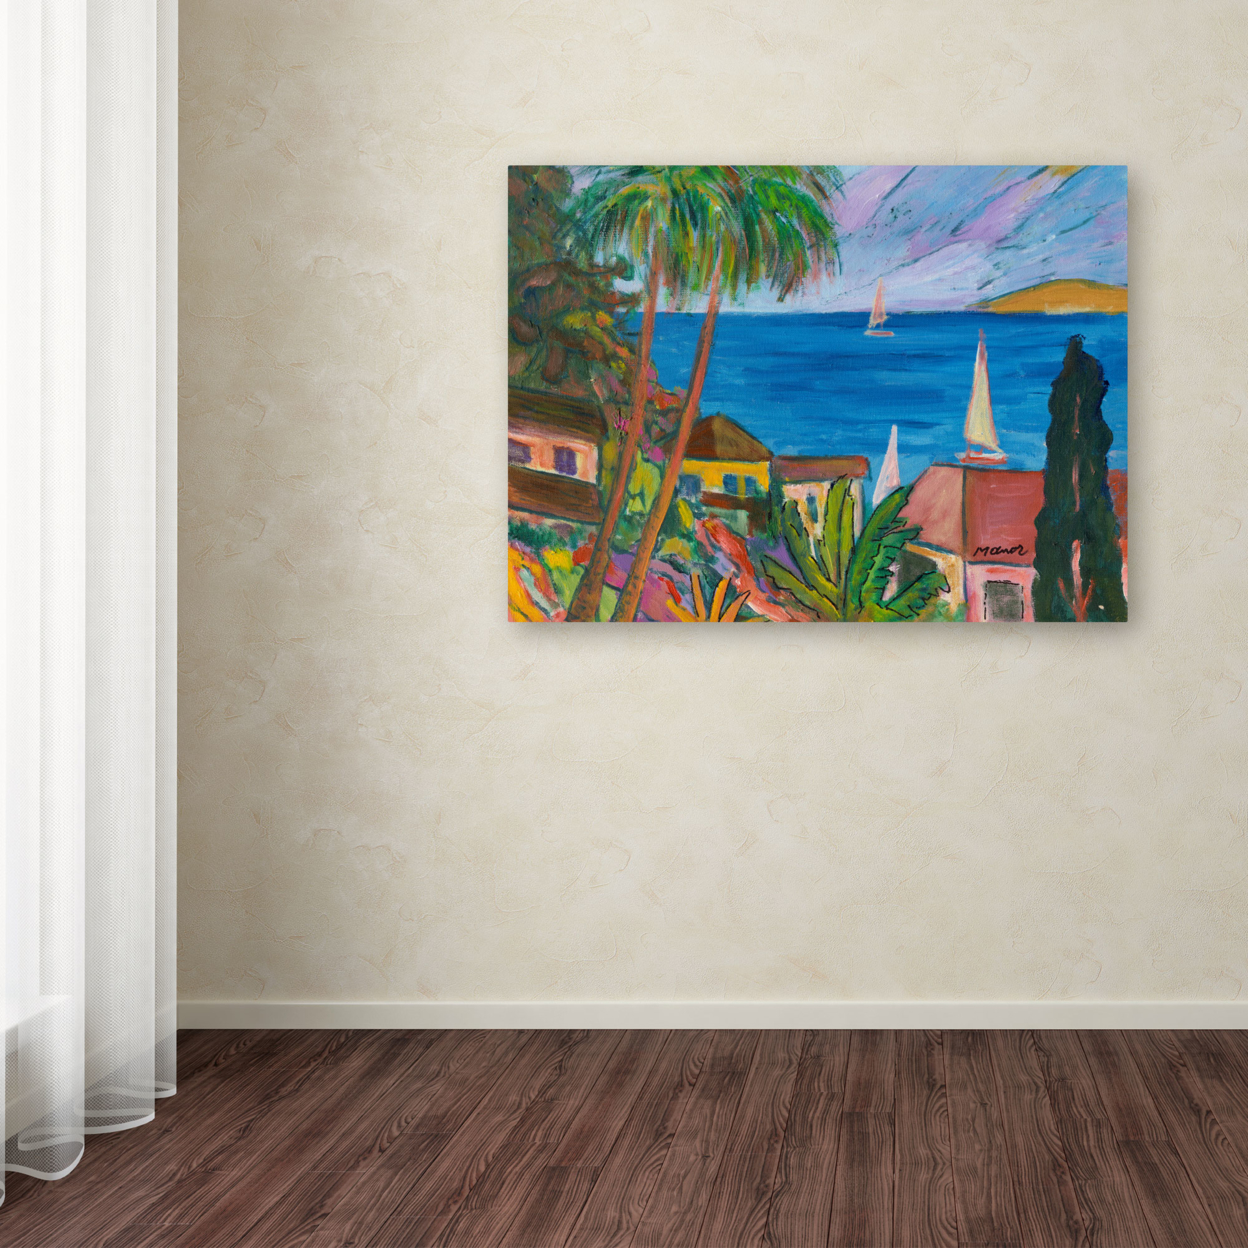 Manor Shadian 'Three Sails On The Pacific' Canvas Wall Art 35 X 47 Inches